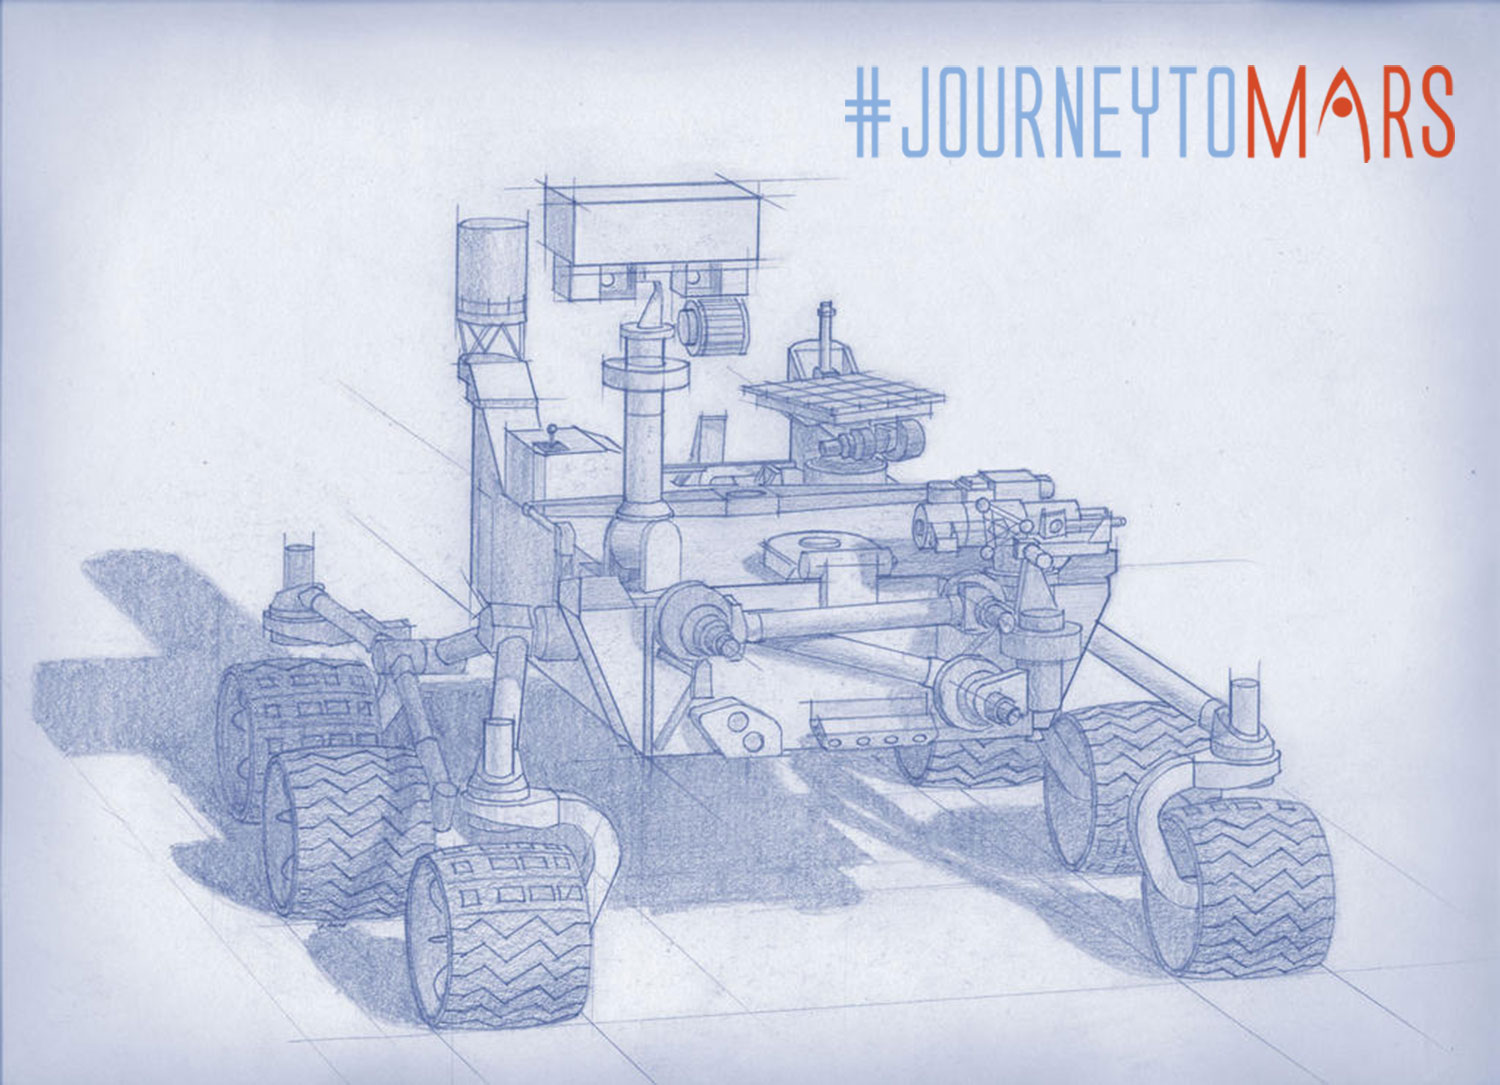 Planning for NASA's 2020 Mars rover envisions a basic structure that capitalizes on the design and engineering work done for the NASA rover Curiosity, which landed on Mars in 2012, but with new science instruments selected through competition for accomplishing different science objectives.  Credit:   NASA/JPL-Caltech